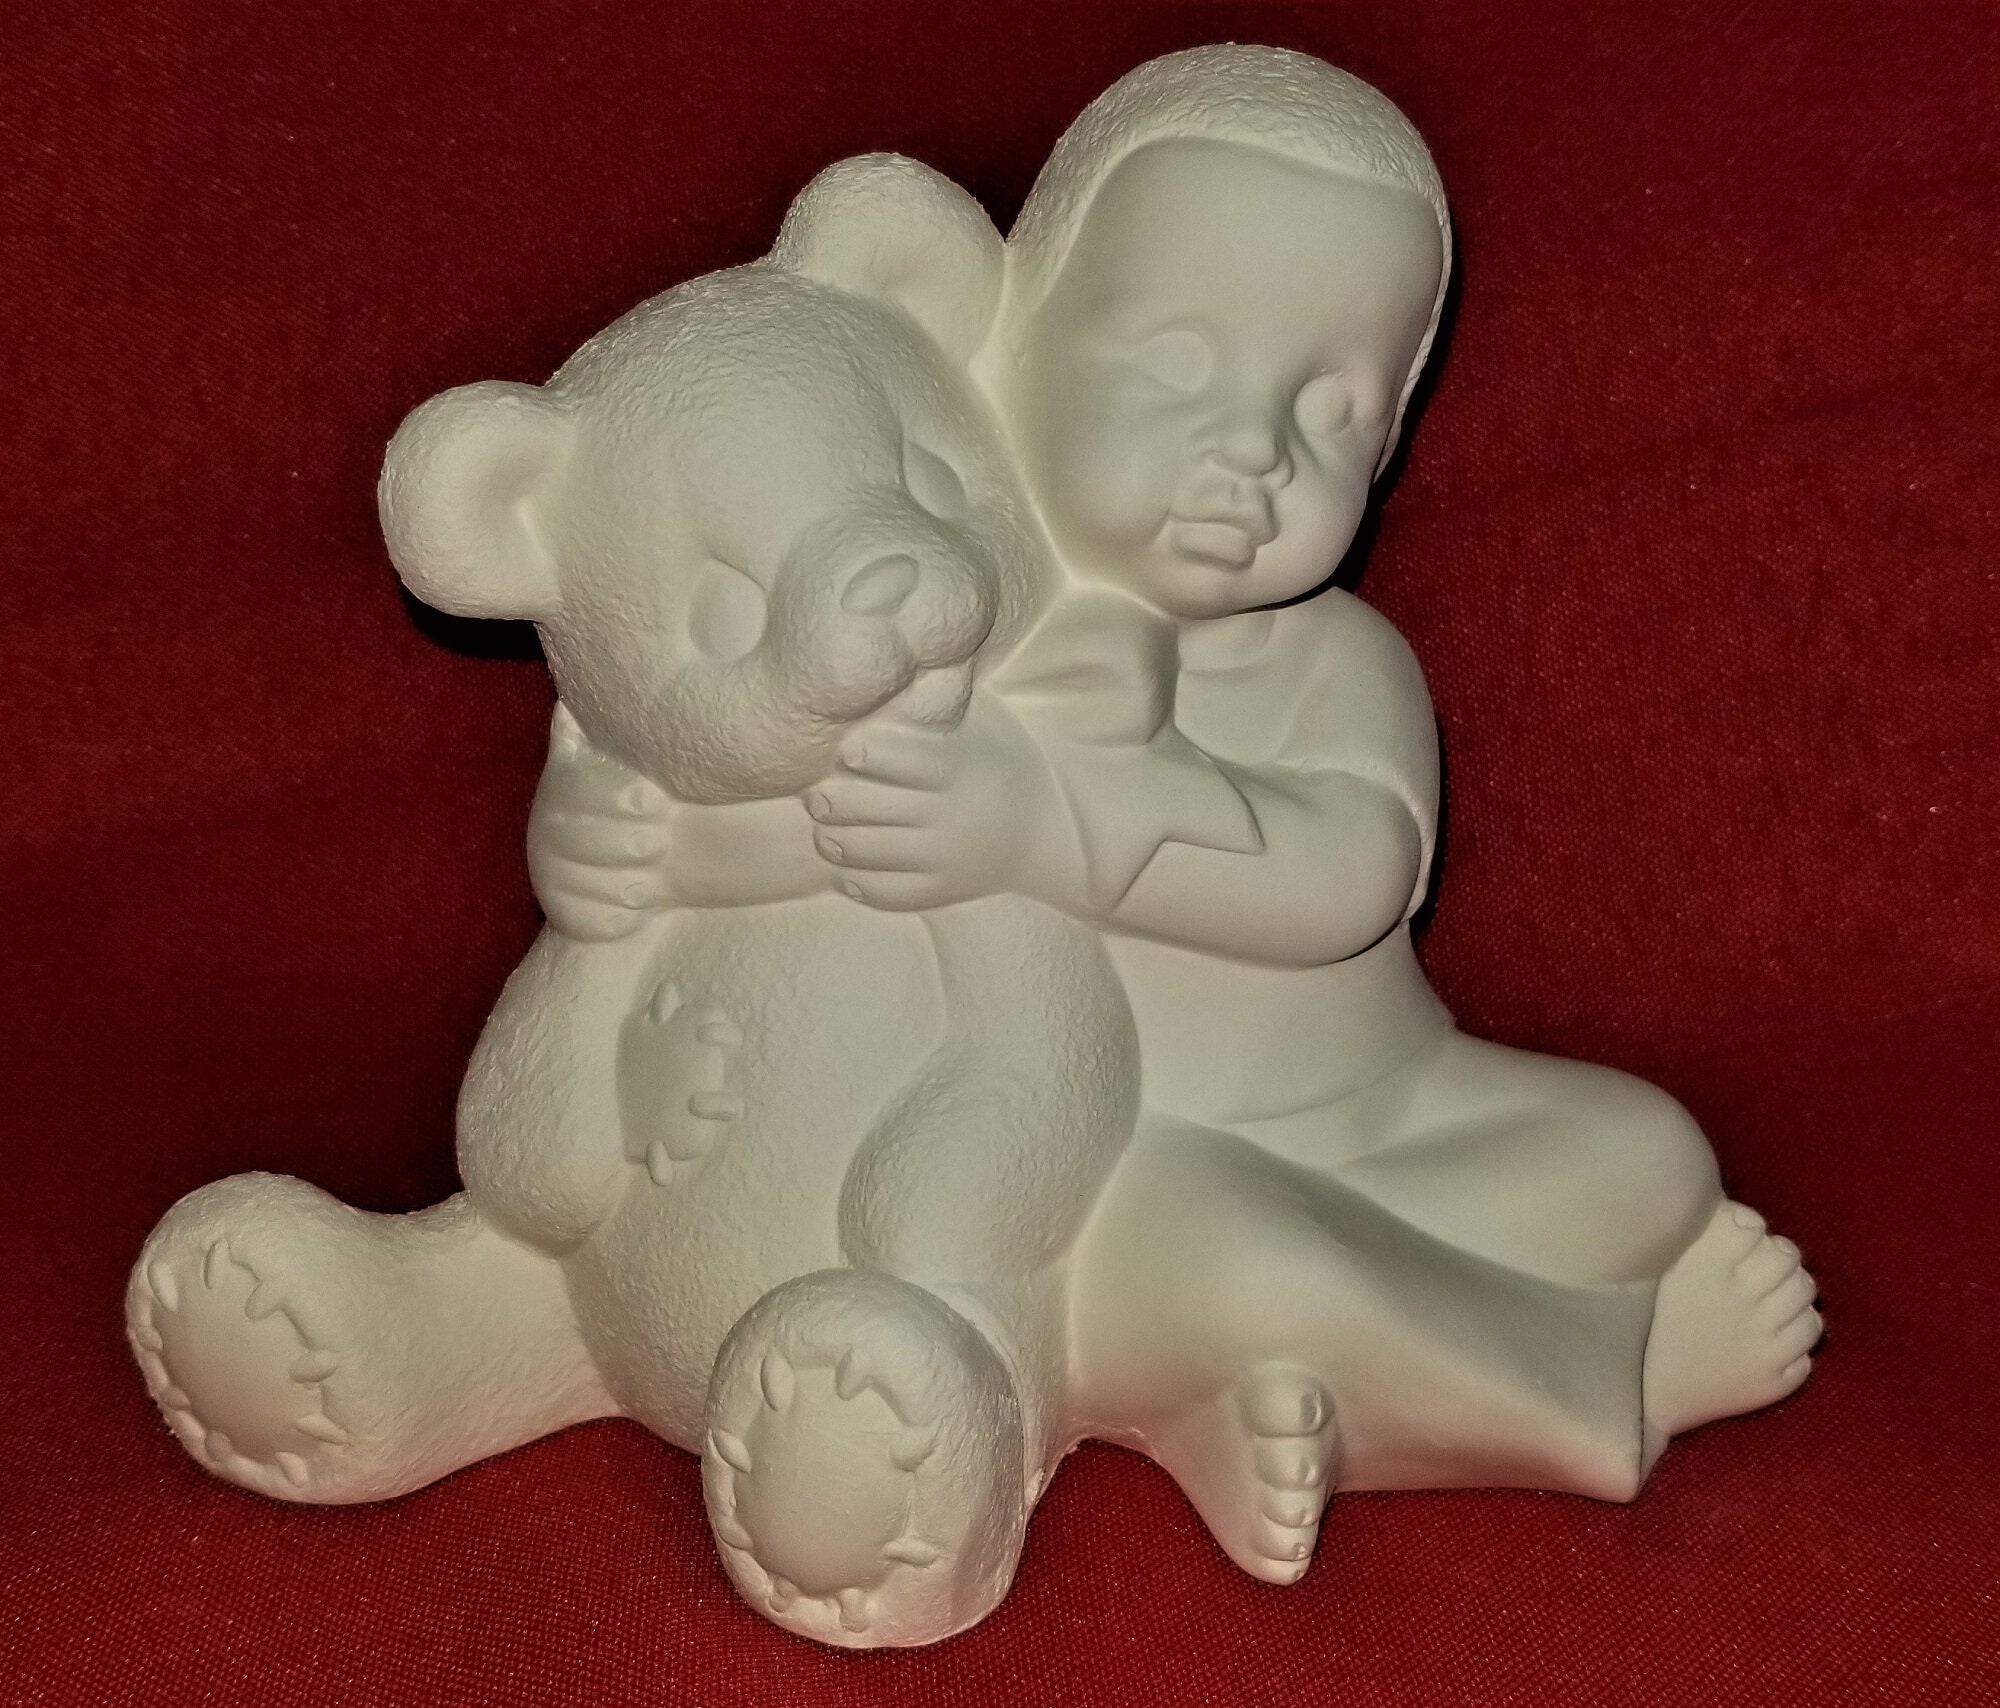 soap carvings of boy and girl